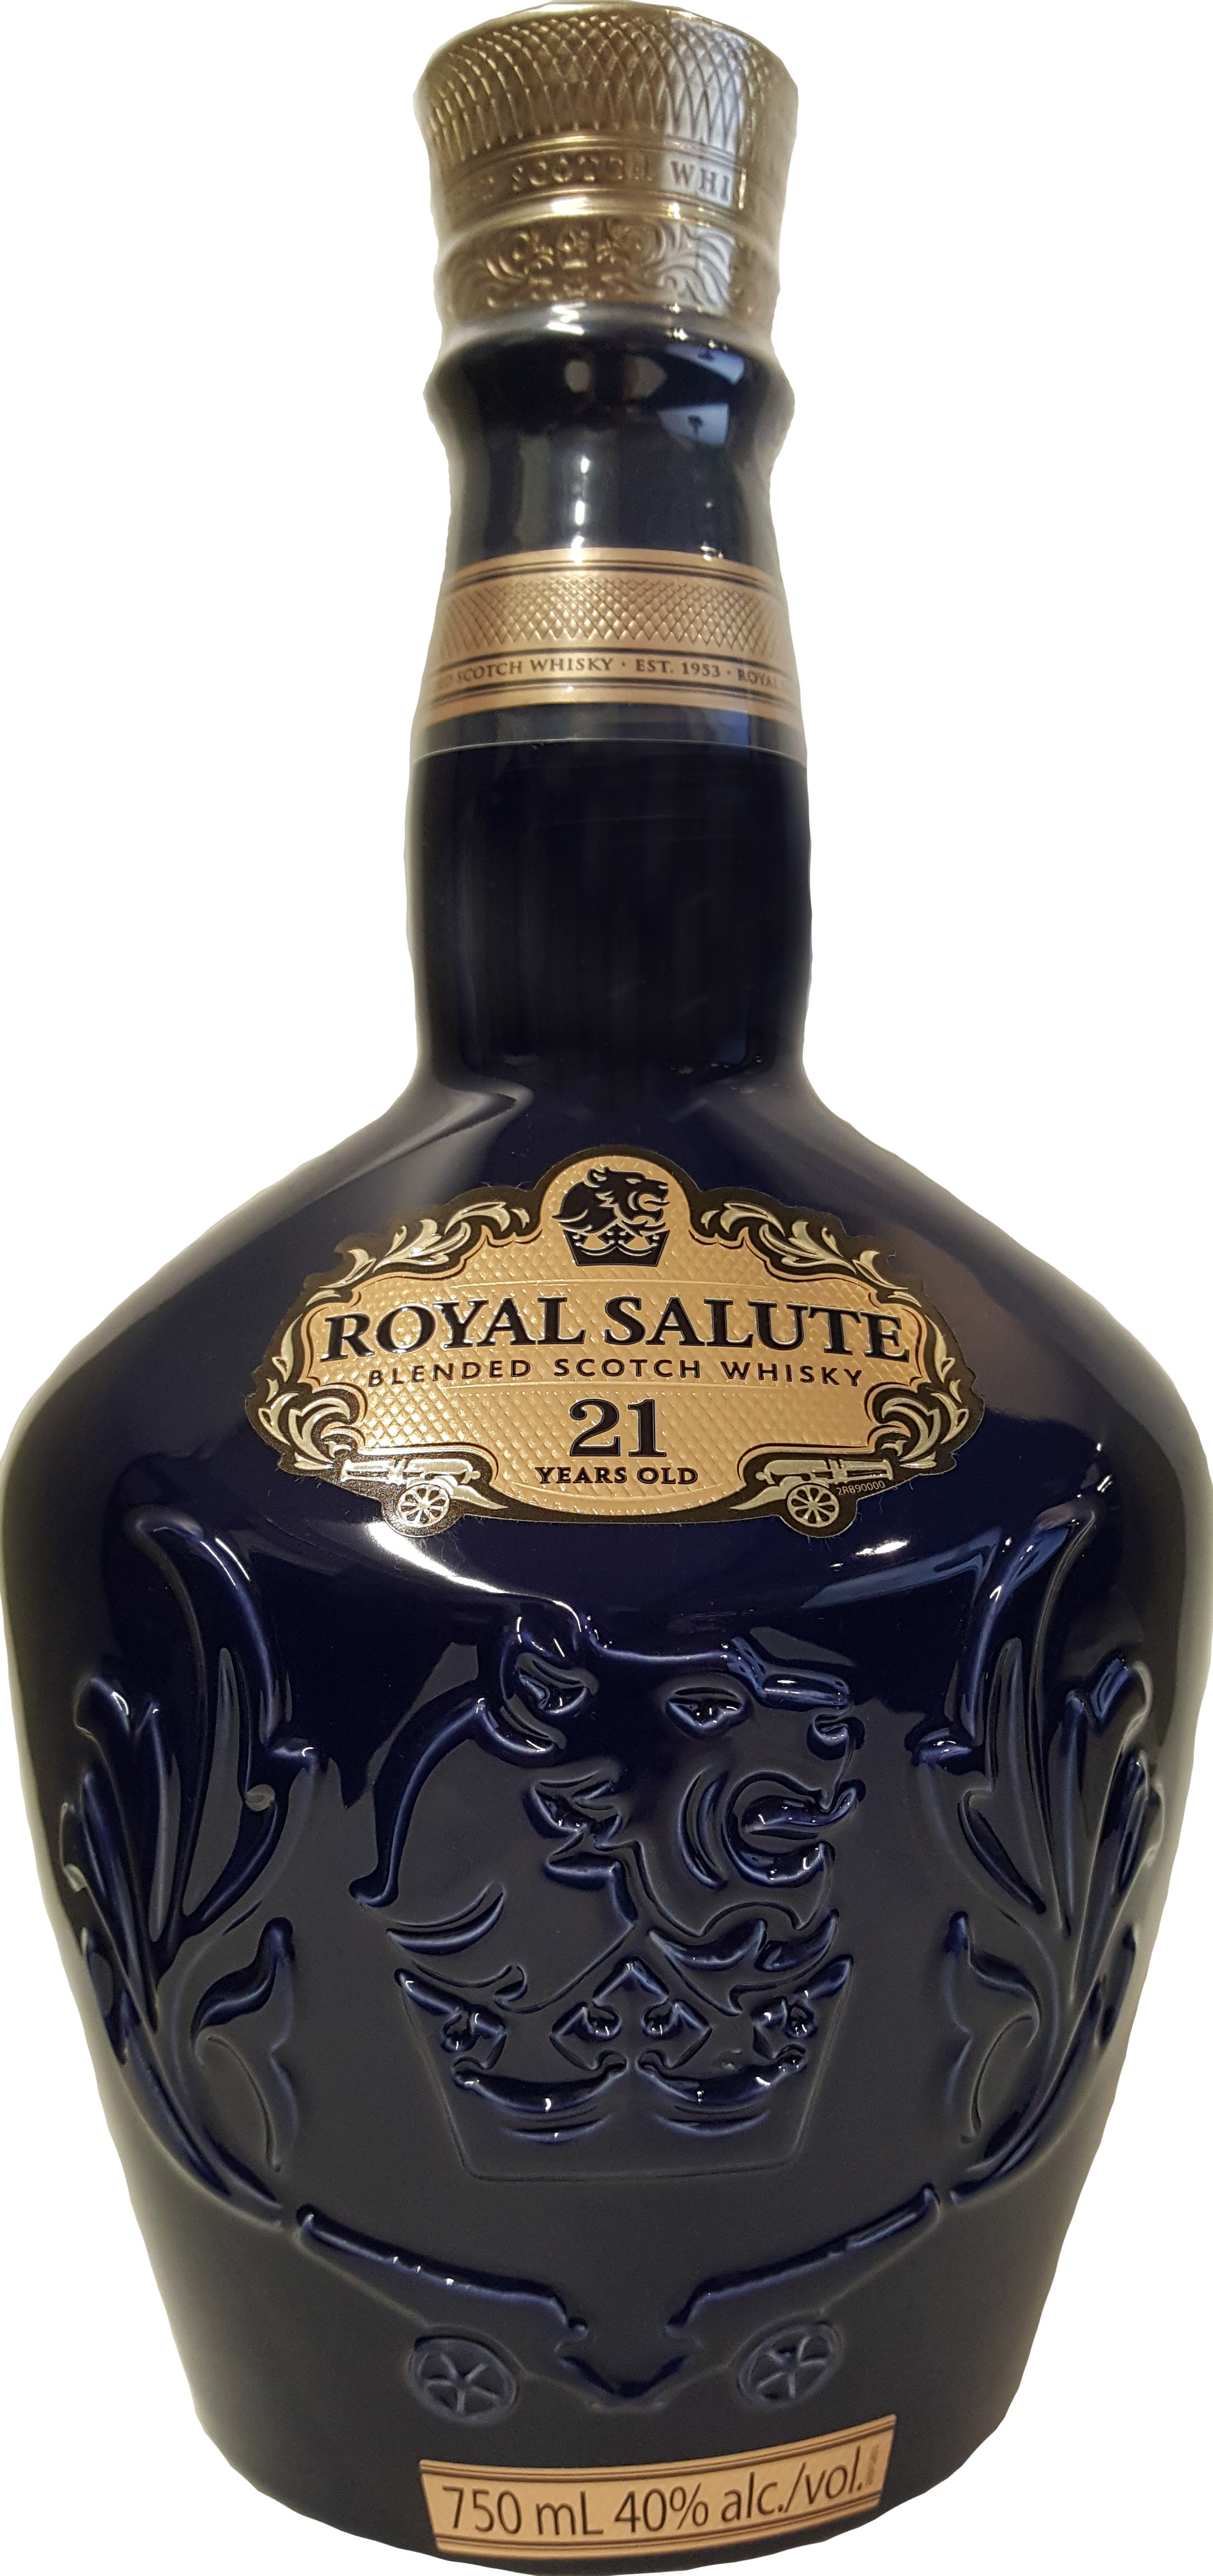 royal salute 21 price in hyderabad